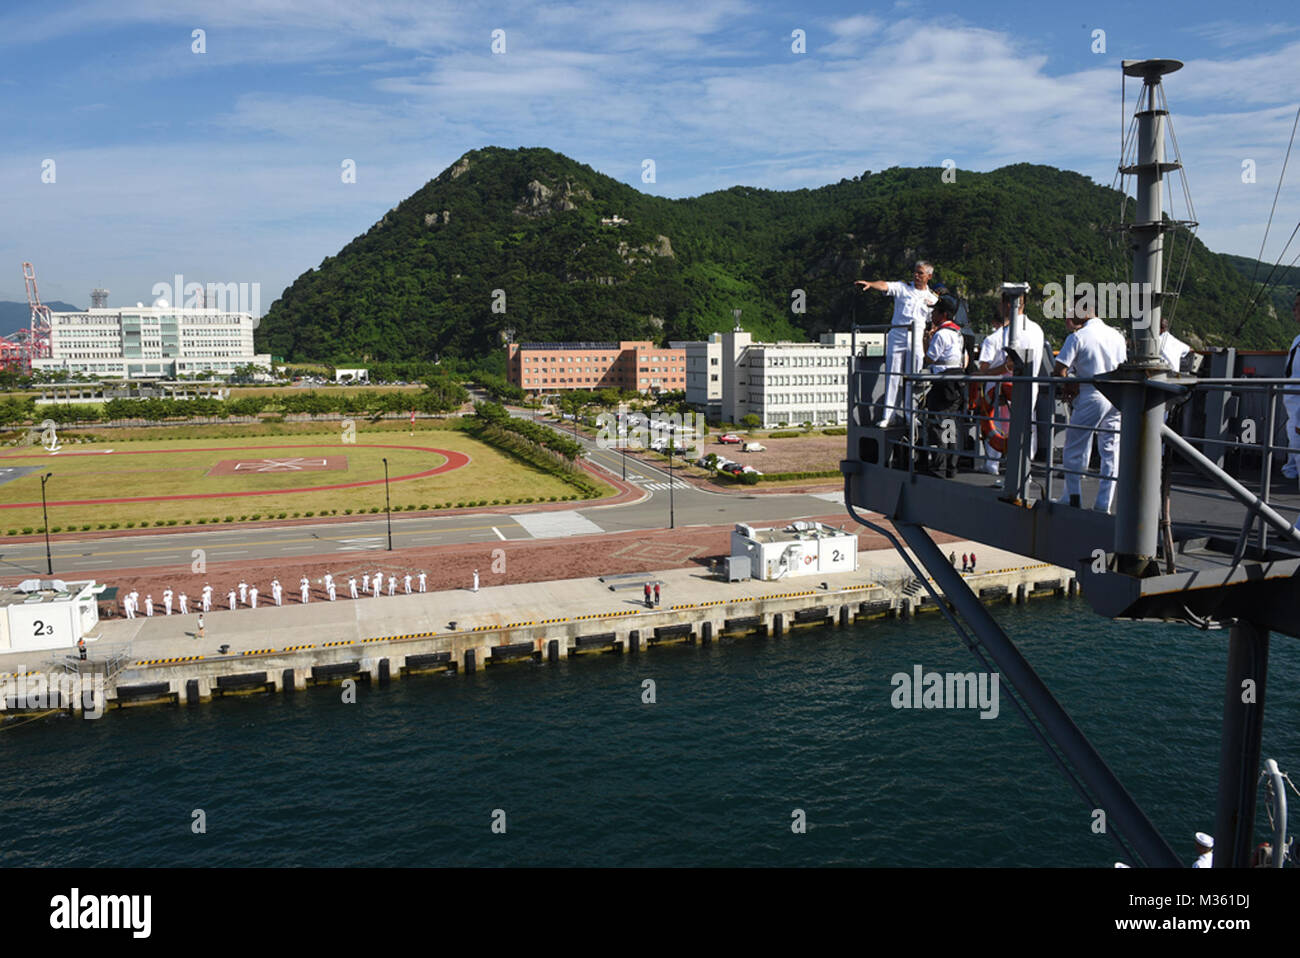 150813-N-NM917-175 BUSAN, Republic of Korea (Aug. 13, 2015) - Commanding Officer of the U.S. 7th Fleet flagship USS Blue Ridge (LCC 19), Capt. Kyle P. Higgins, right corner, observes the ship's arrival in Busan. Blue Ridge is currently providing support for U.S. 7th Fleet's involvement in the bi-lateral exercise, 2015 Ulchi Freedom Guardian (UFG). UFG is an annual, combined command and control exercise designed to enhance the combat readiness of ROK and U.S. supporting forces through joint training while improving ROK-U.S. relations. (U.S. Navy photo by Mass Communication Specialist 3rd Class  Stock Photo